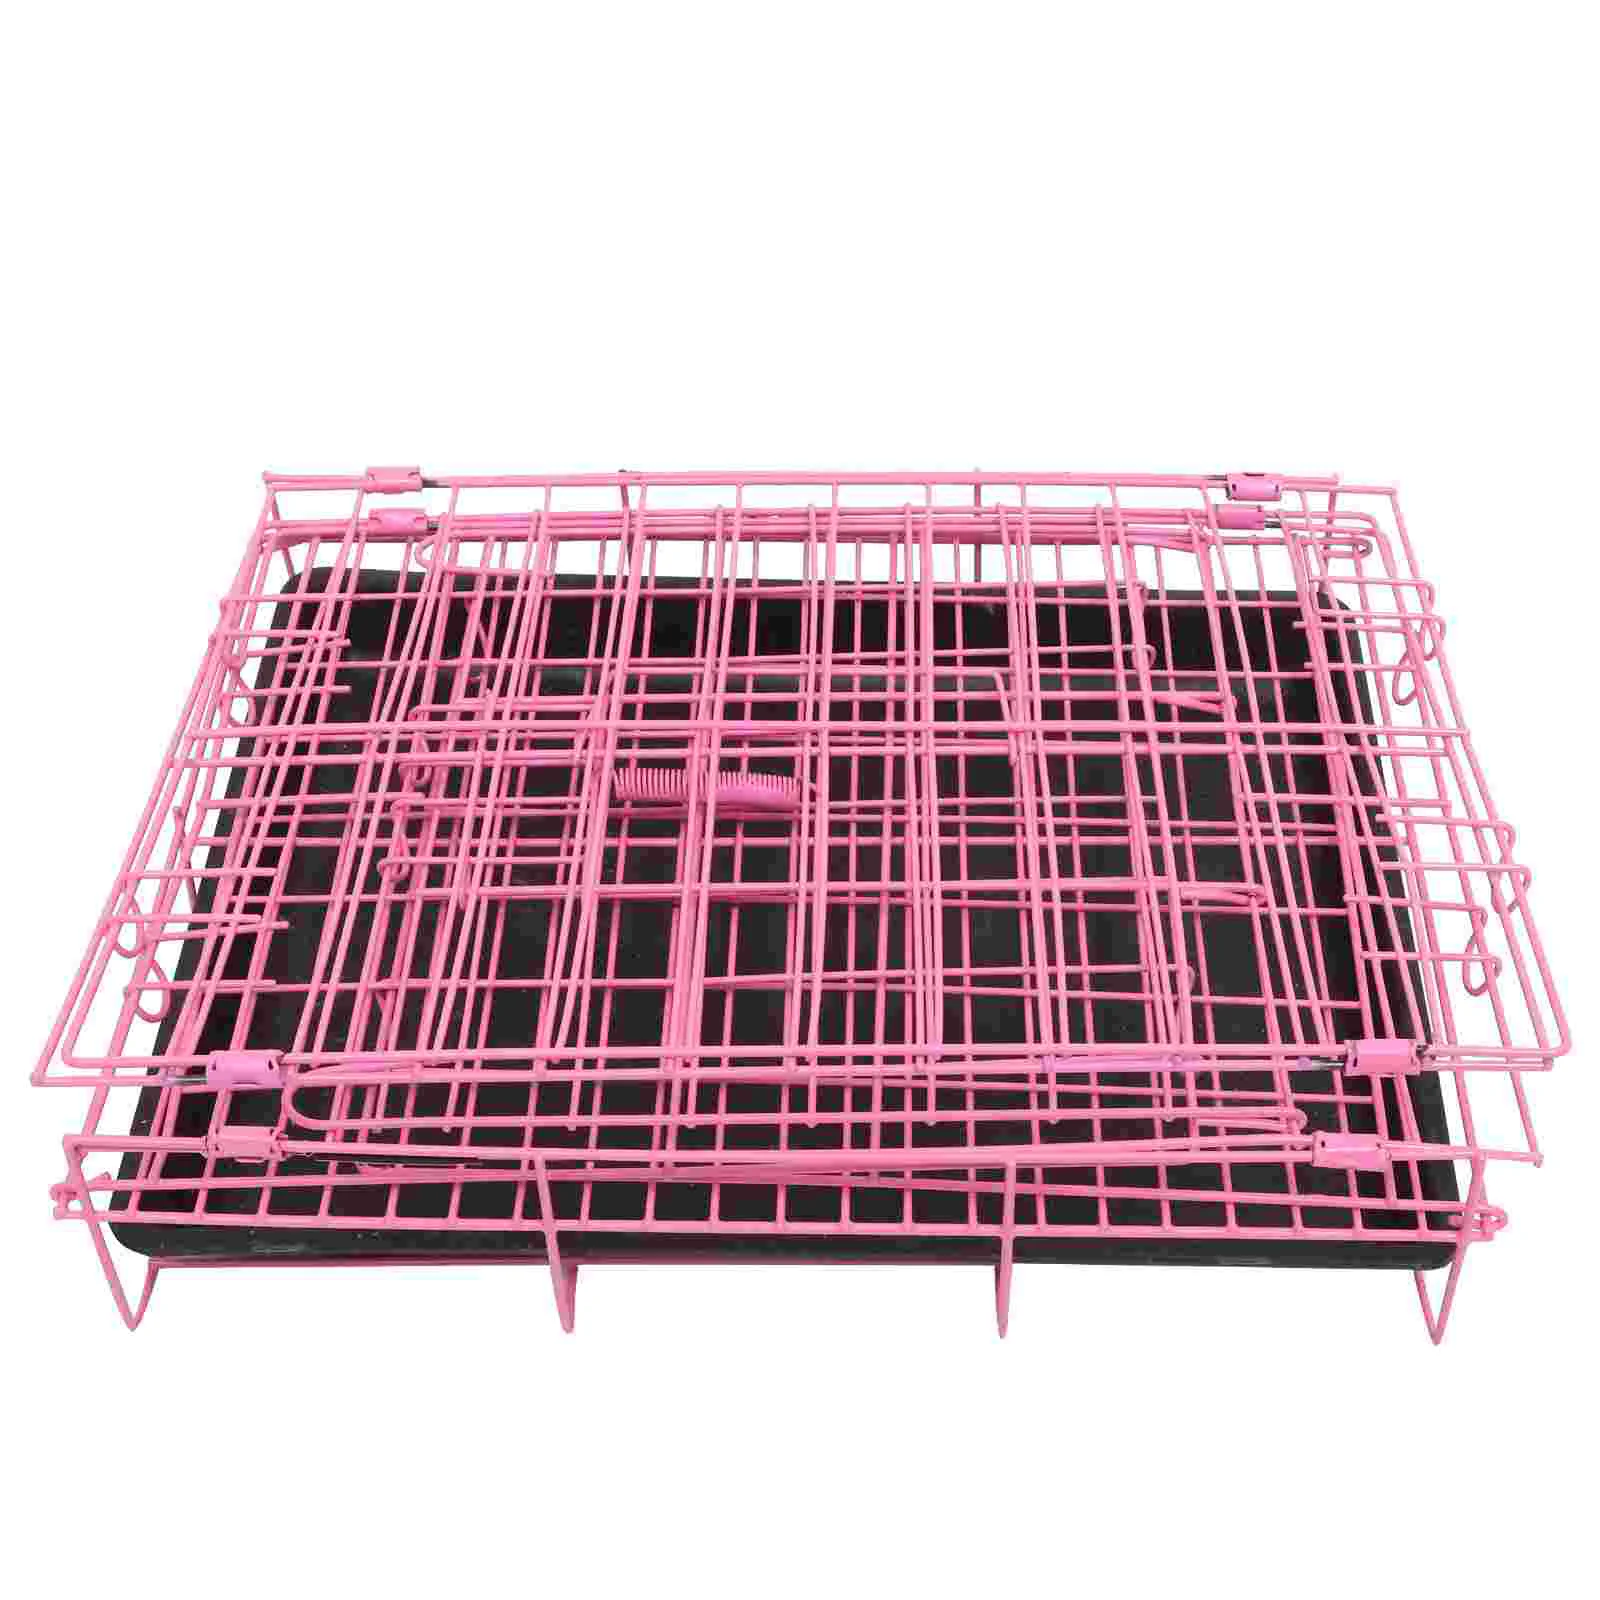 

Kennel Folding Cage, 1 Pc Pets Crate Folding Metal Crate Foldable Single Cage|35x26x34cm